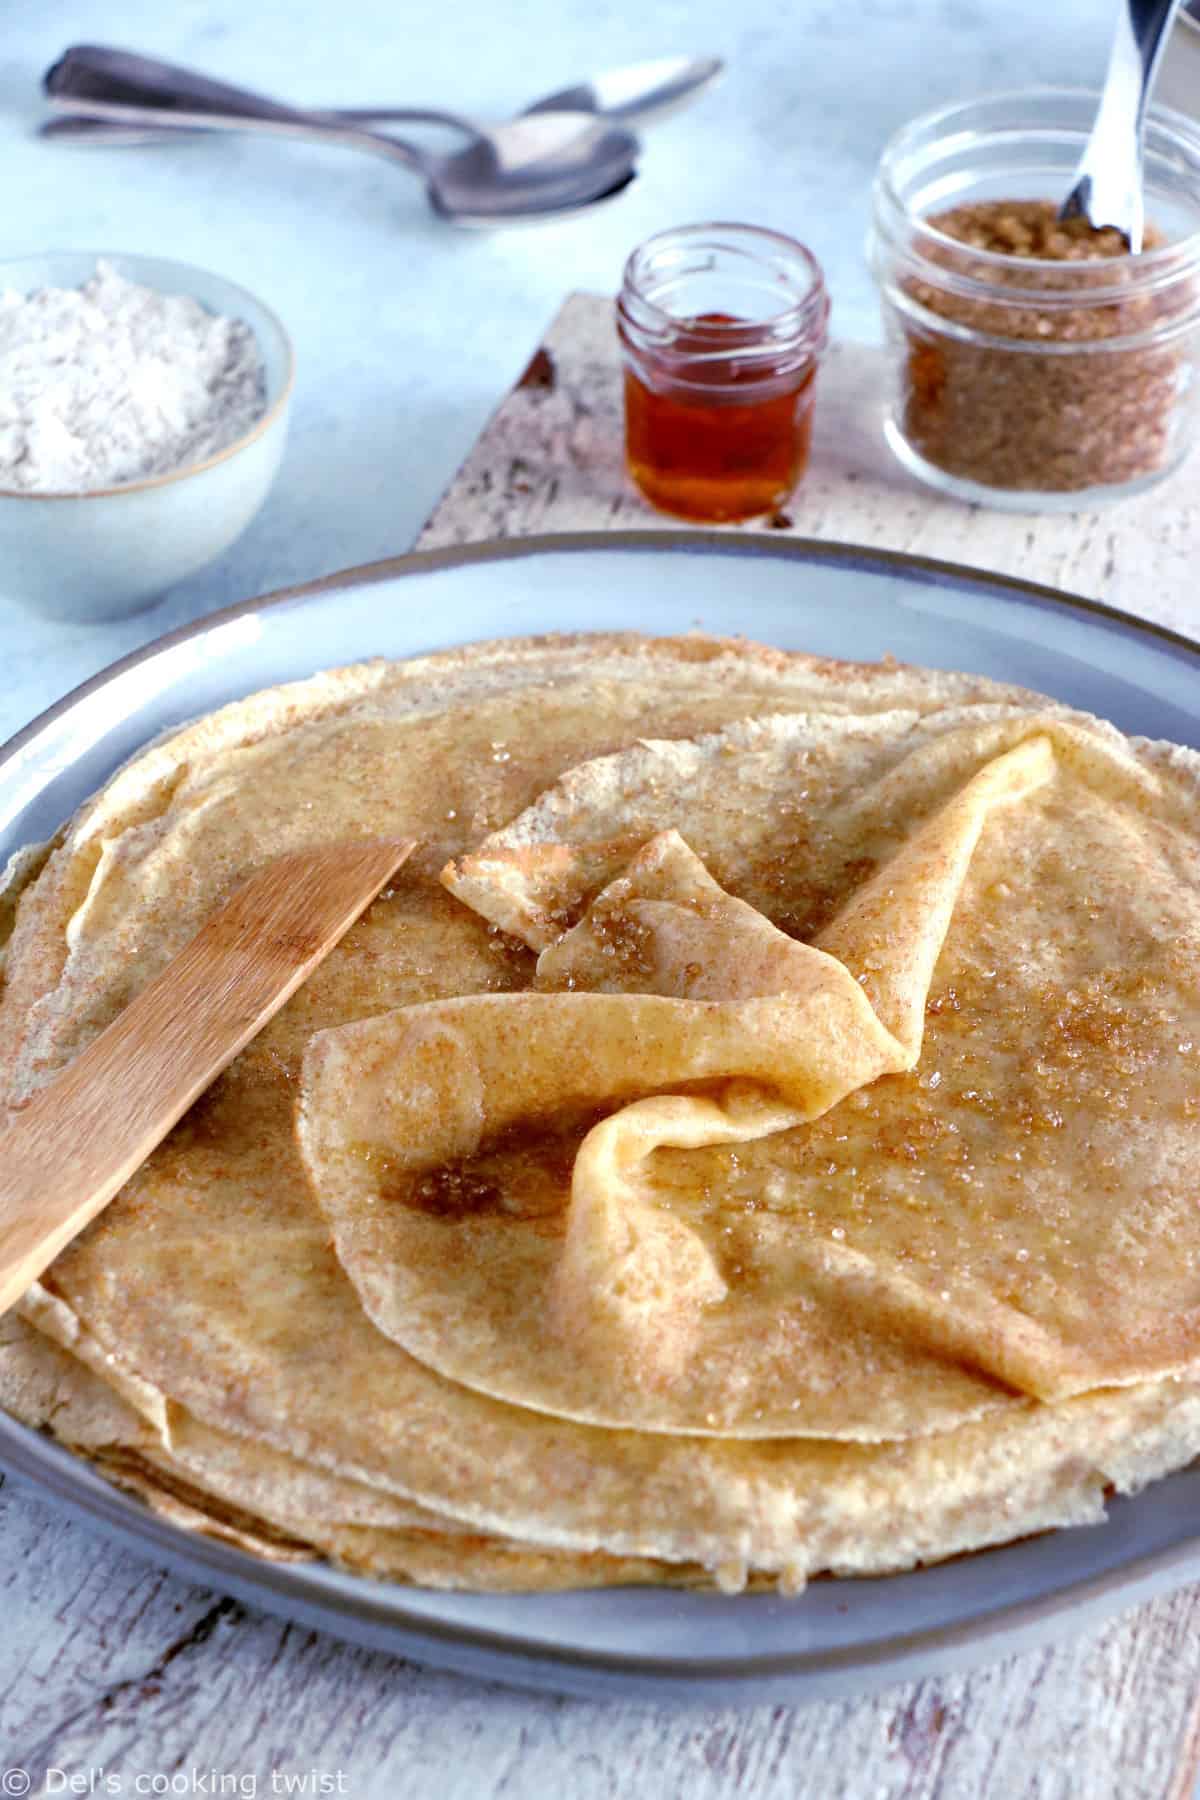 Spelt flour crepes are easy to make, with a perfect thin, light and supple texture and a mild, nutty flavor.